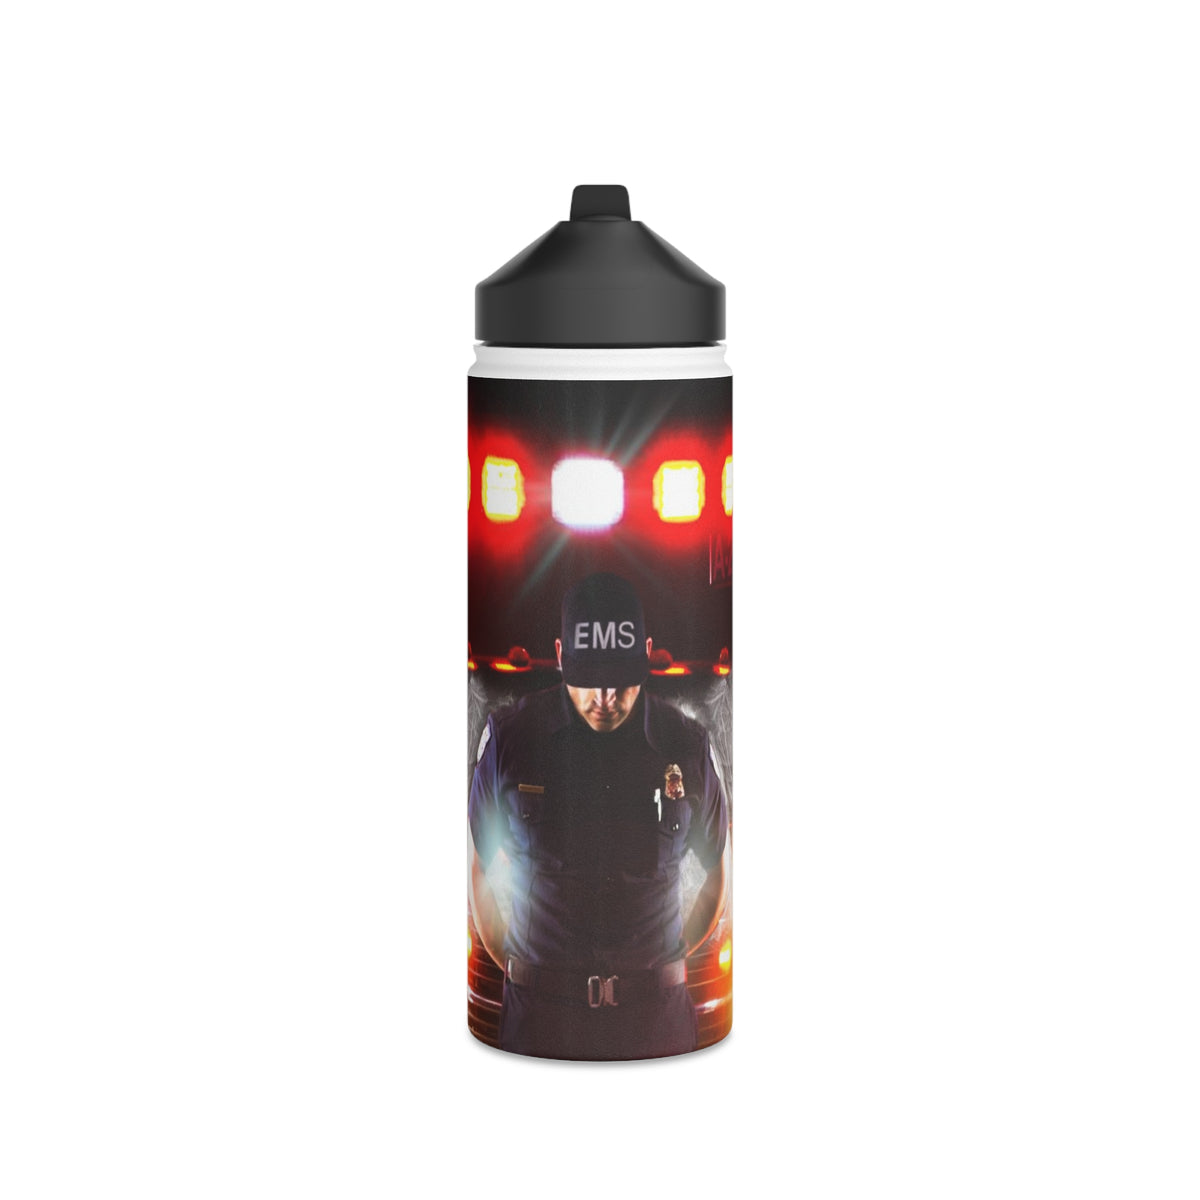 EMS, Stainless Steel Water Bottle